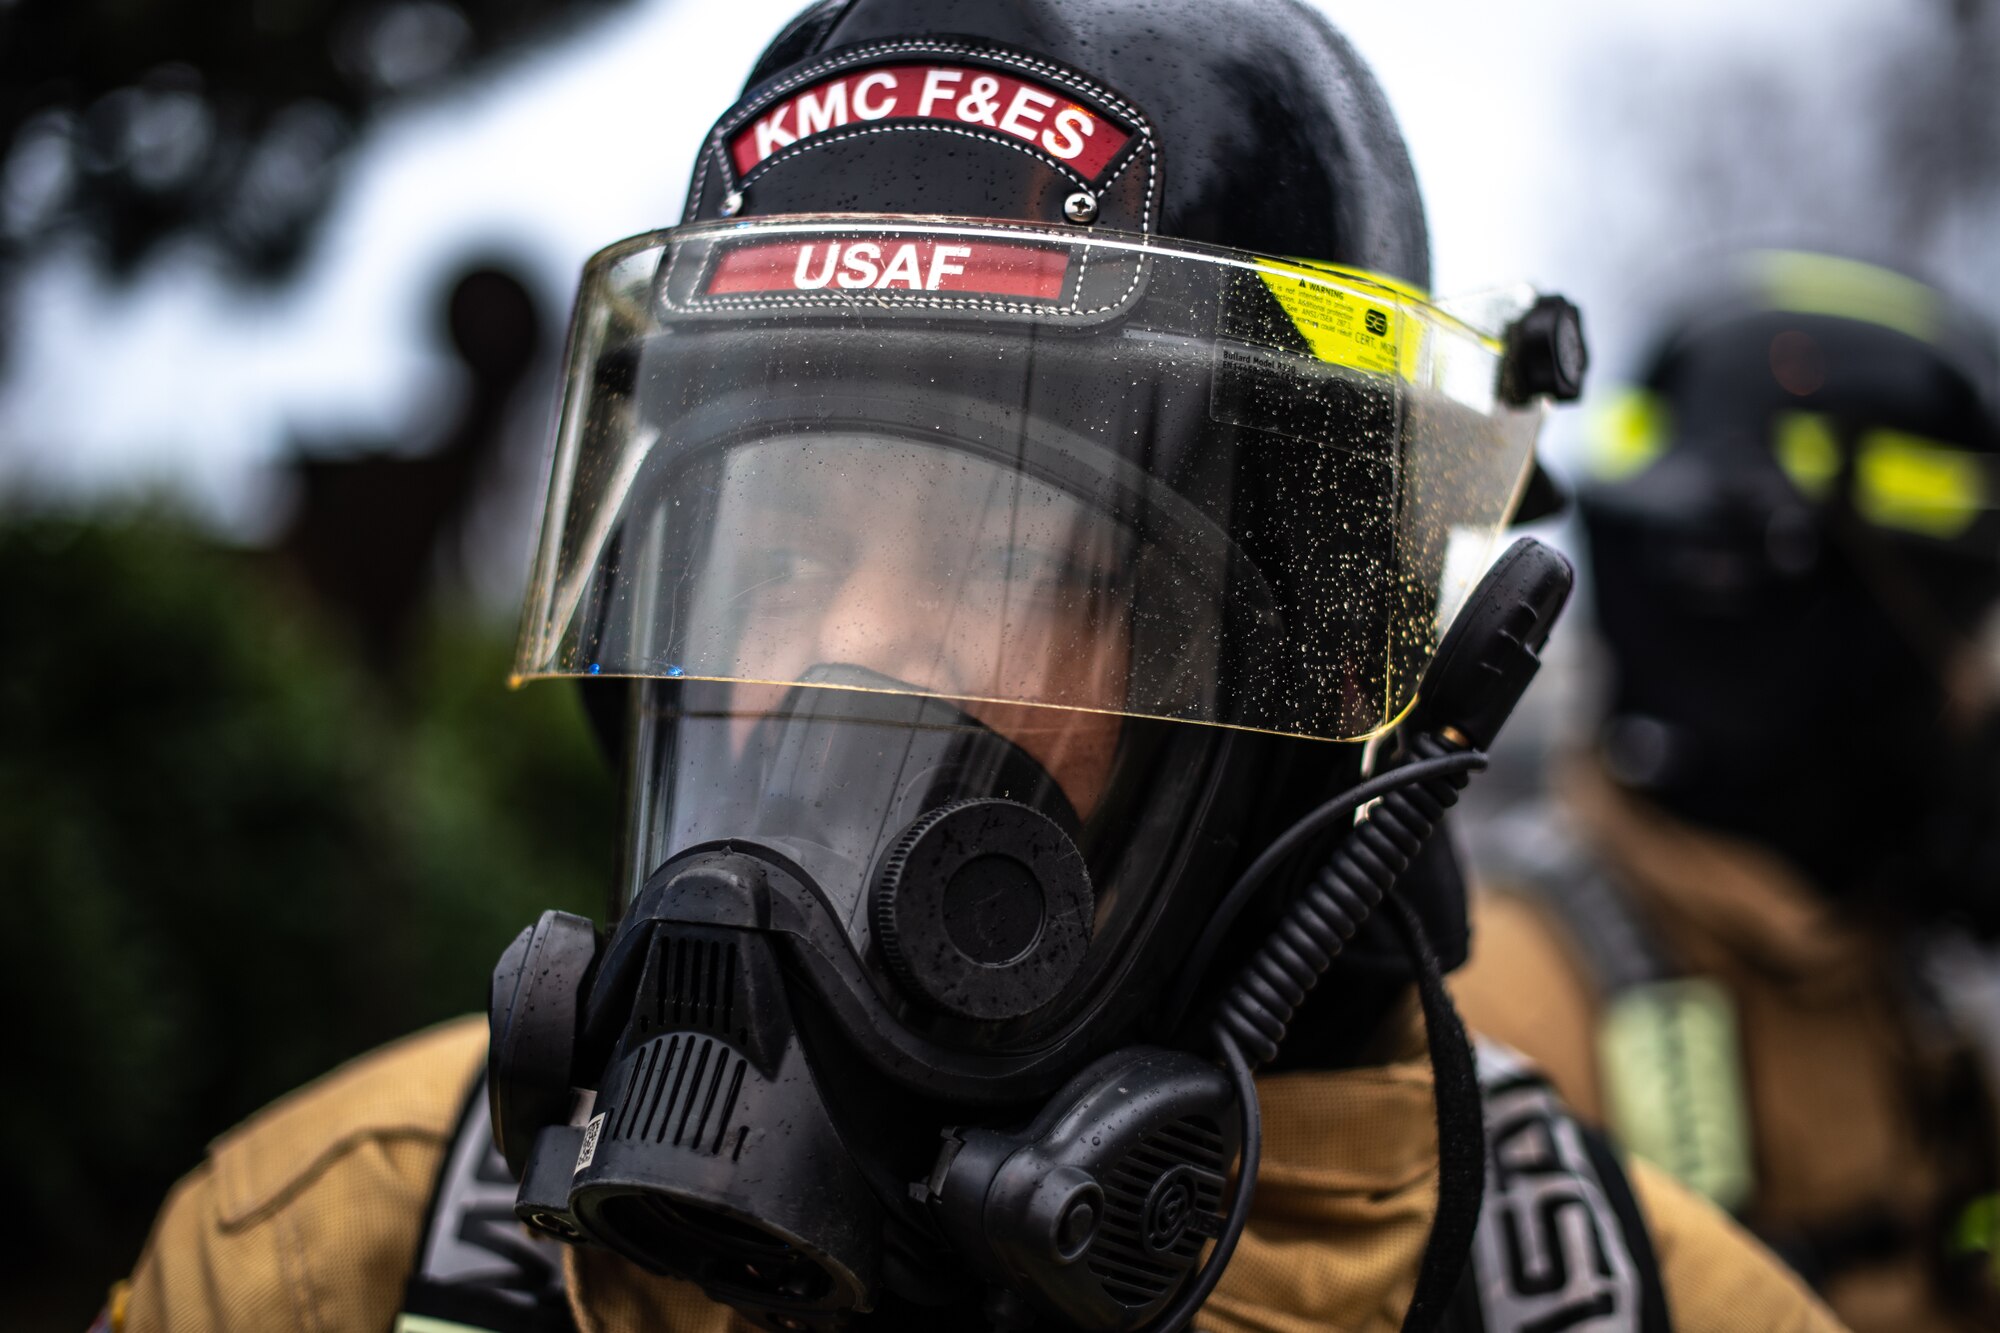 A U.S. Air Force firefighter assigned to the 86th Civil Engineer Squadron prepares to conduct a simulated decontamination line during exercise Operation Varsity 19-04 at Ramstein Air Base, Germany, Dec. 12, 2019. Response teams reacted to a simulated chemical attack which tested their ability to conduct decontamination procedures on the affected personnel. Exercises like Operation Varsity gives every Airman an opportunity to improve readiness in their respective Air Force specialty. (U.S. Air Force photo by Staff Sgt. Devin Boyer)